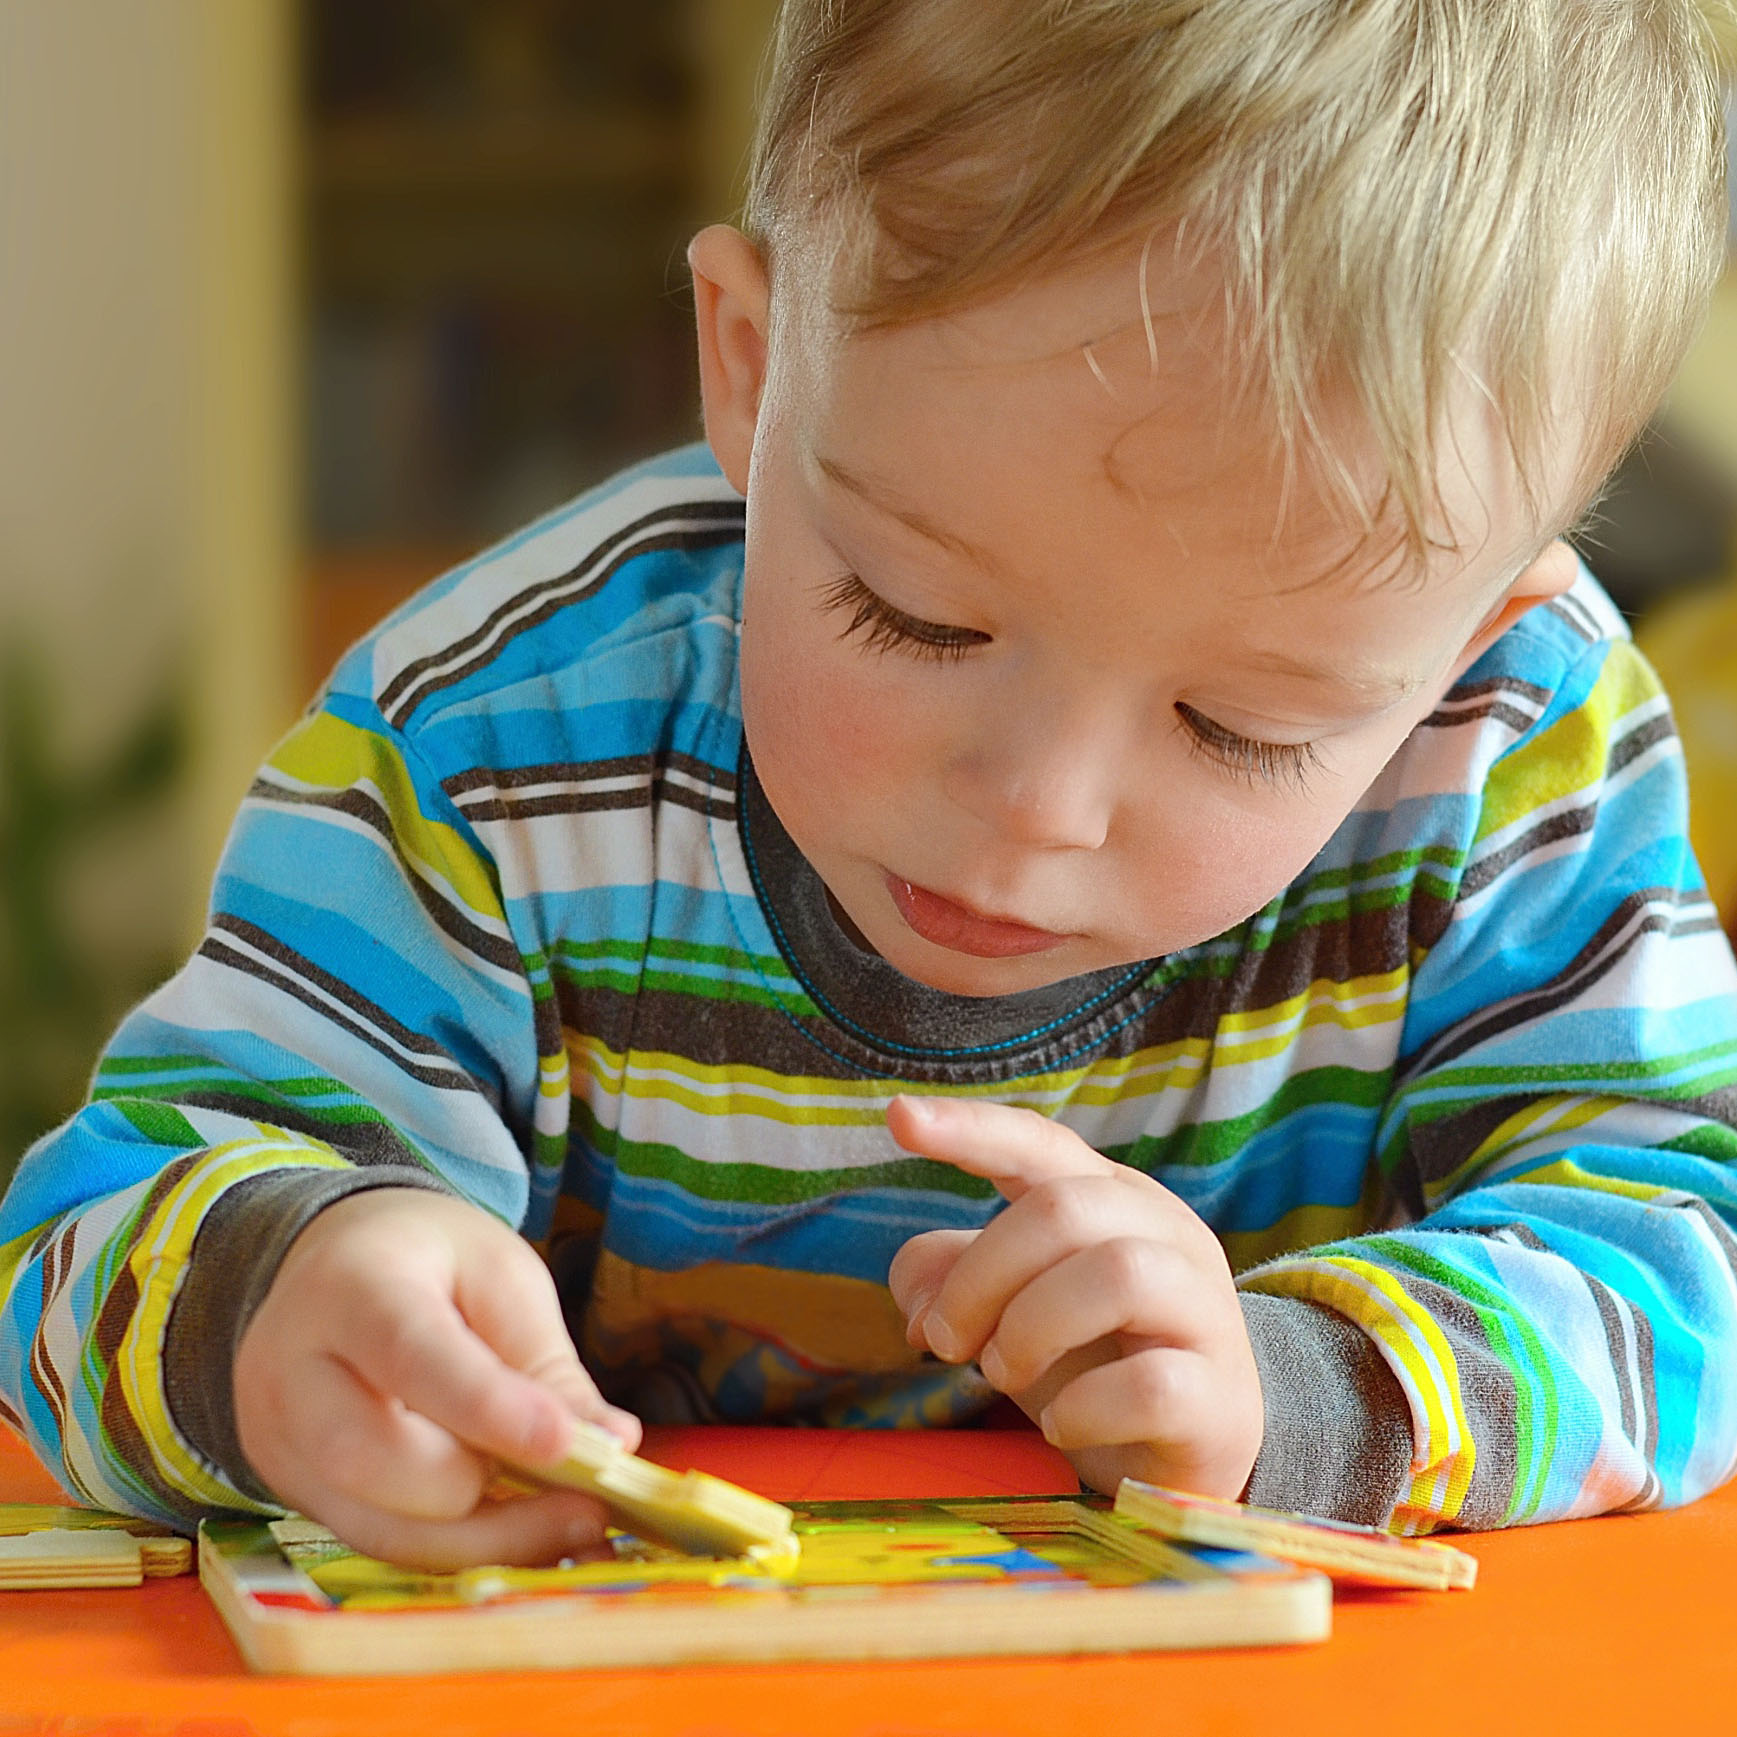 A toddler plays with a wooden puzzle.